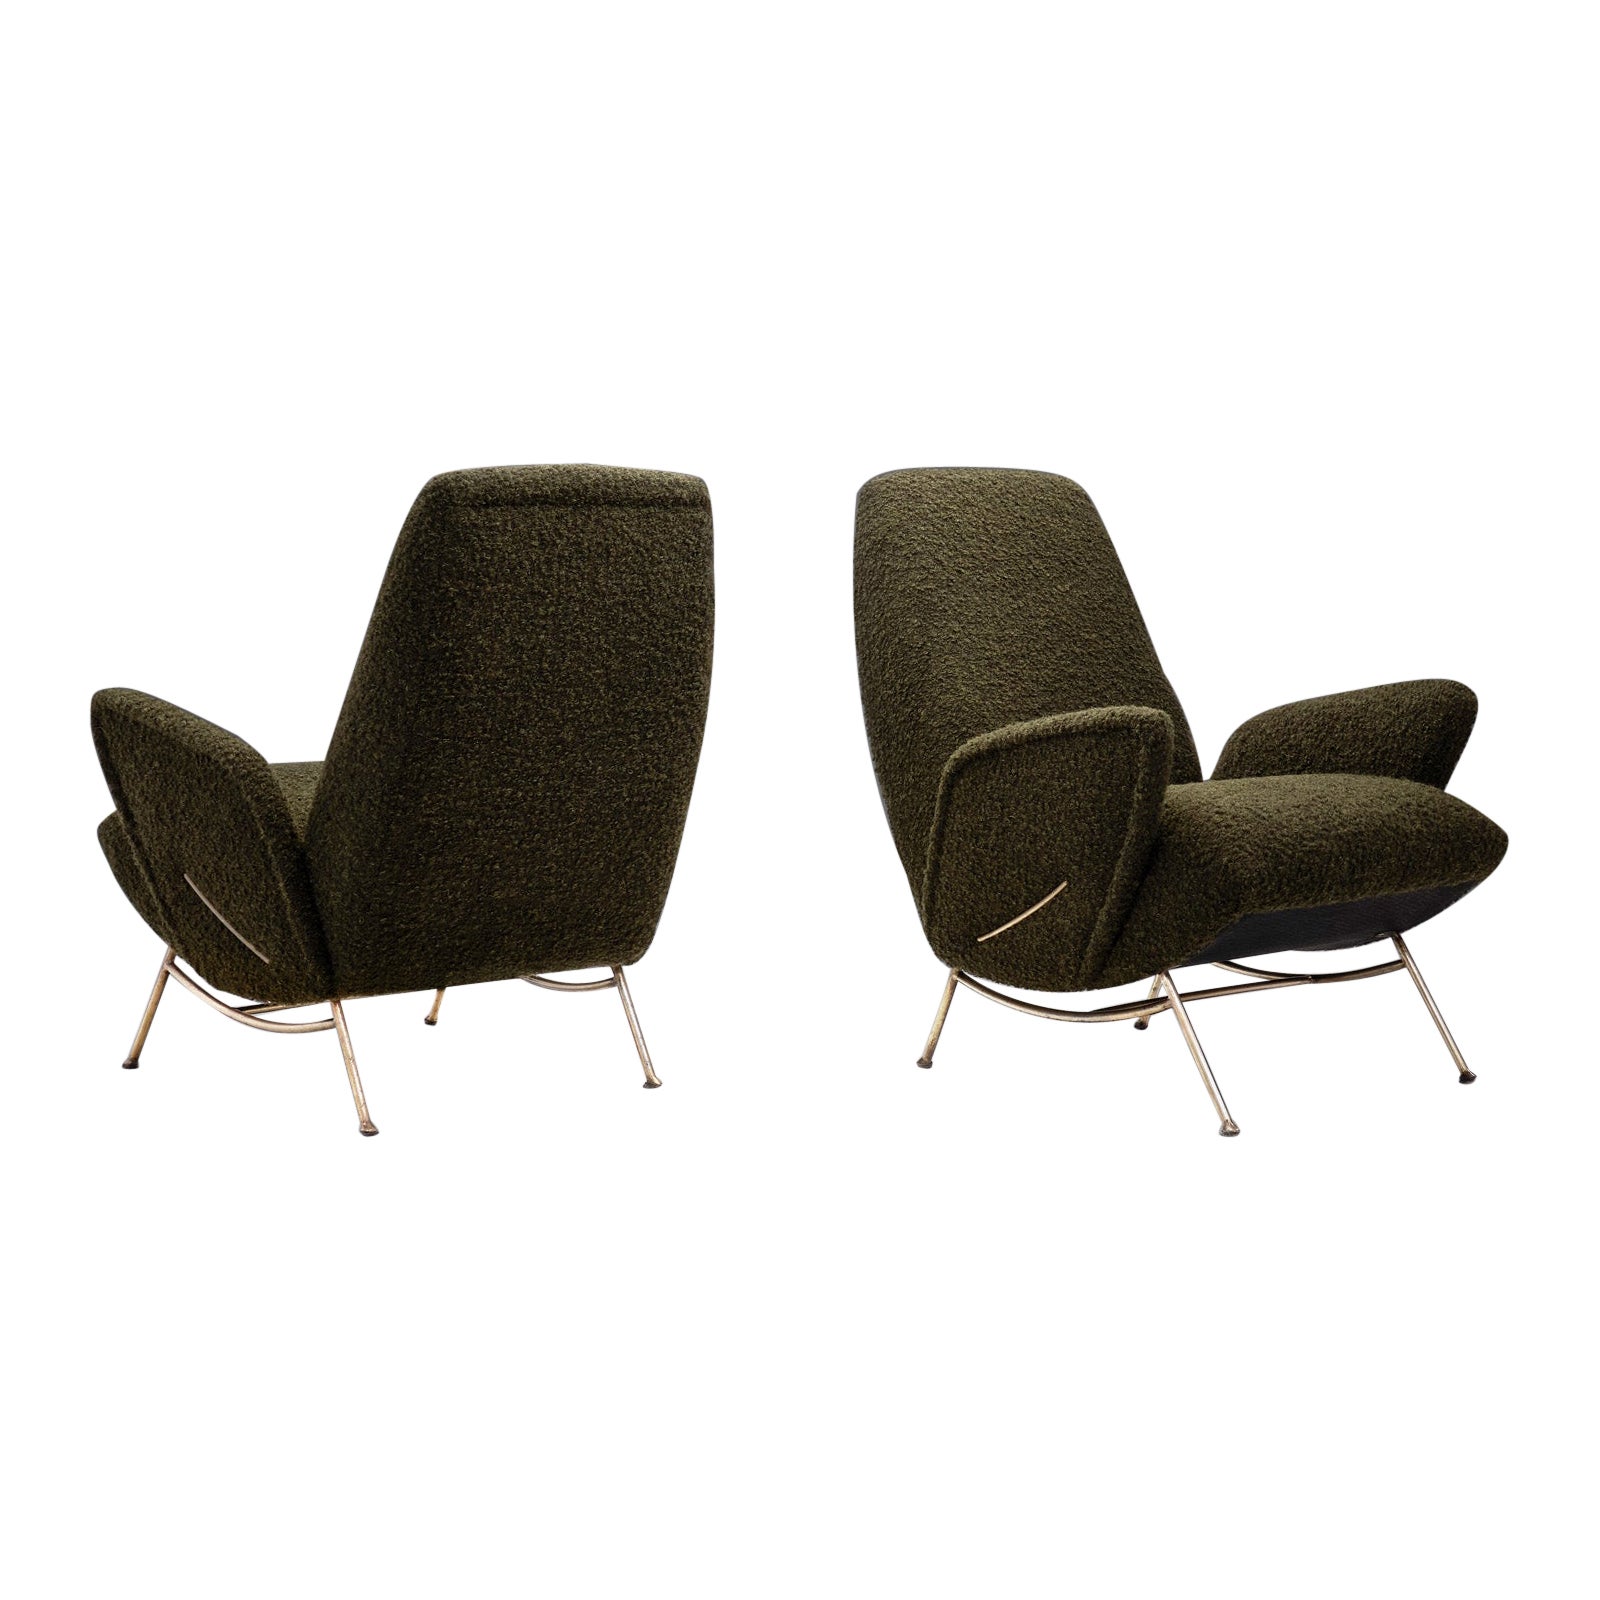 Pair of Midcentury Lounge Chairs with Metal Legs by Nino Zoncada, Italy, 1950s